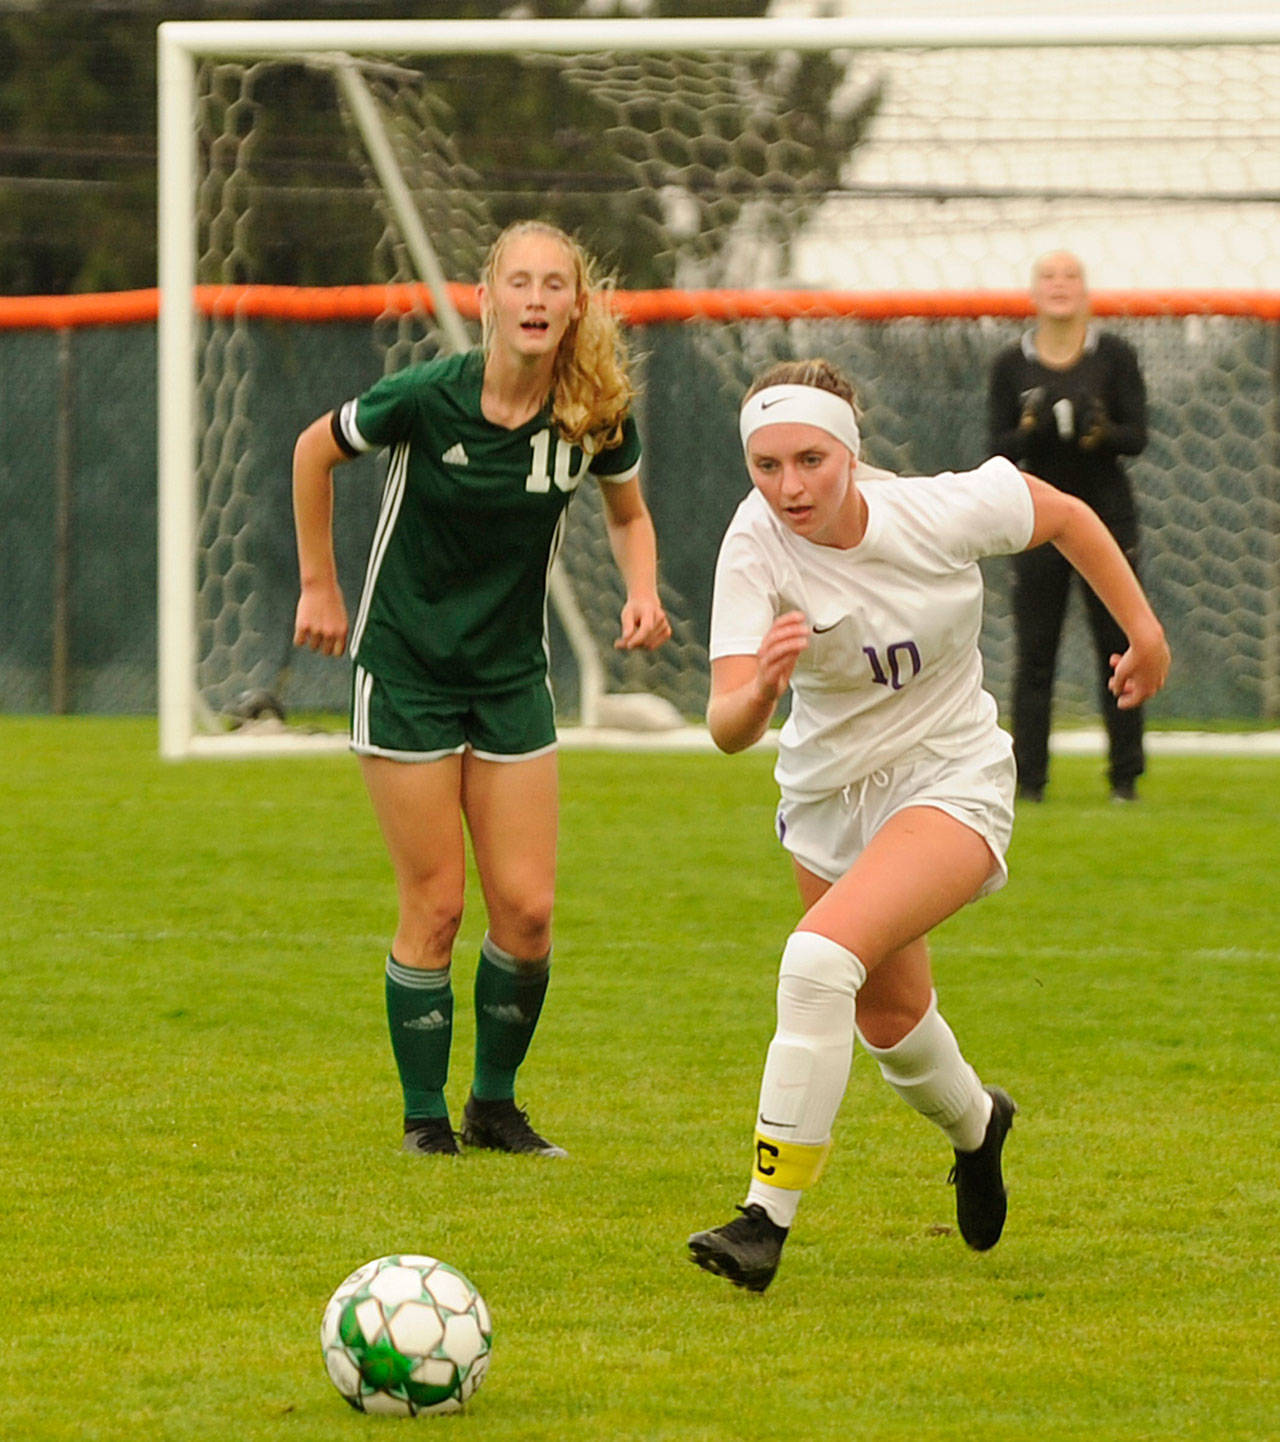 Girls soccer: SHS star signs with Edmonds Community College